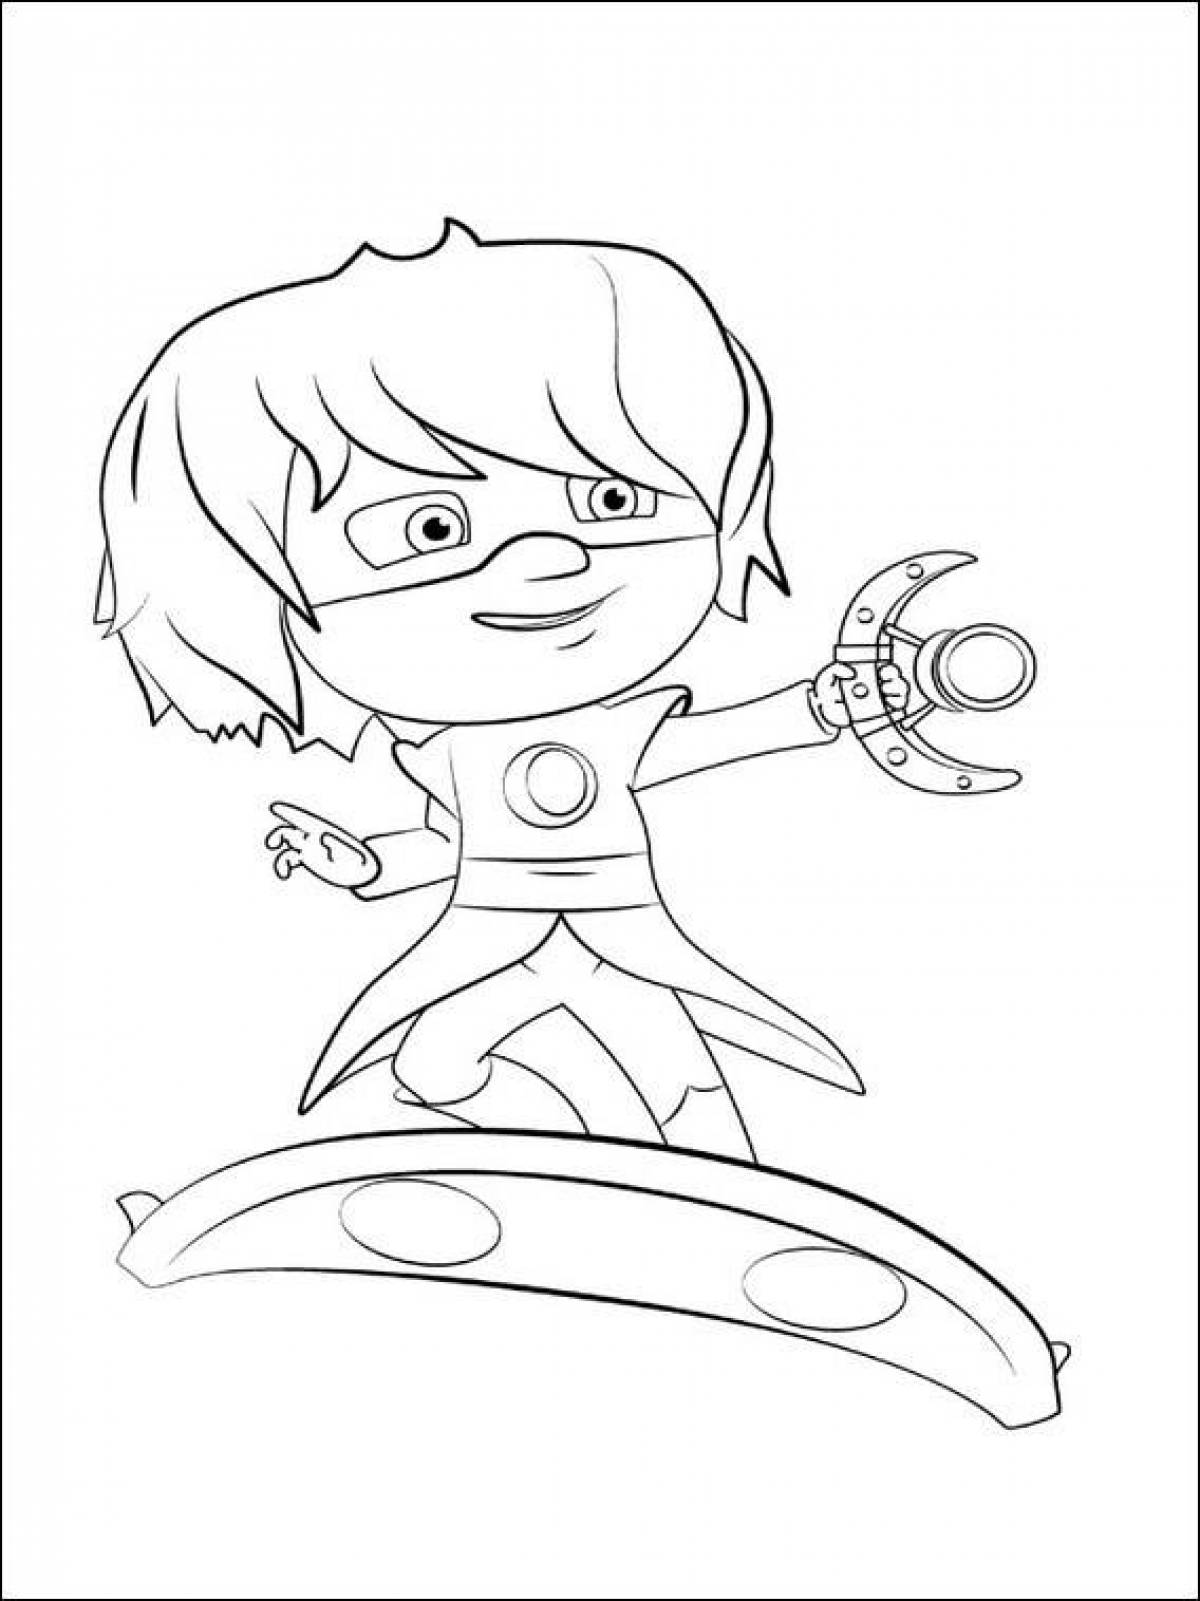 Awesome tom hero coloring page